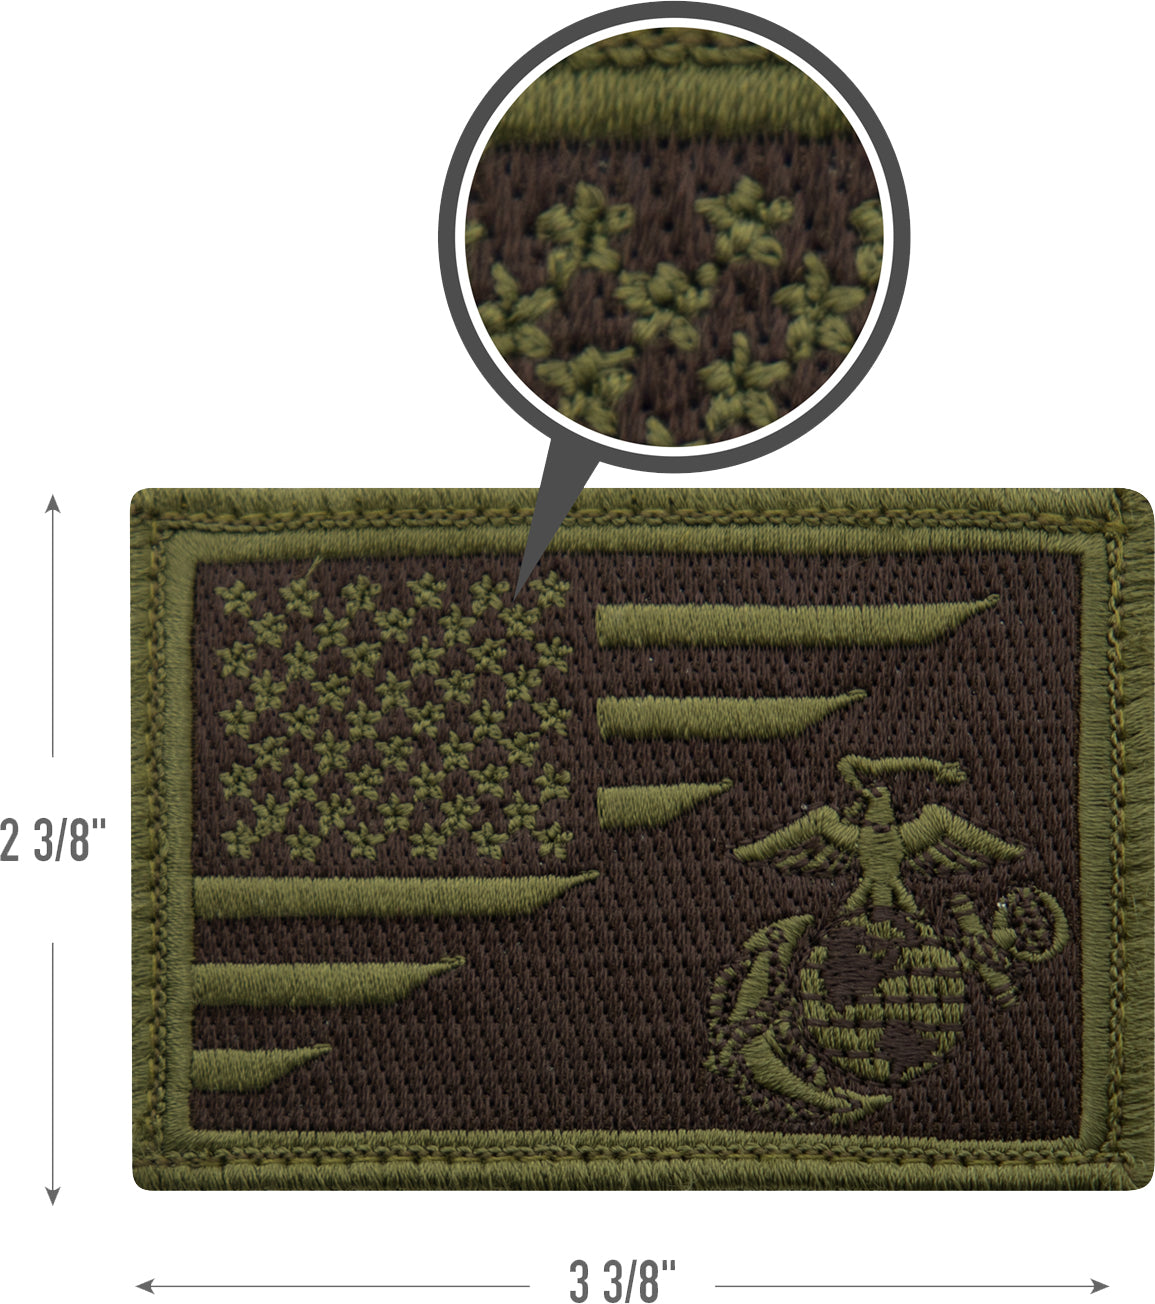 Shop Deluxe U.S. Marine Patches - Fatigues Army Navy Gear